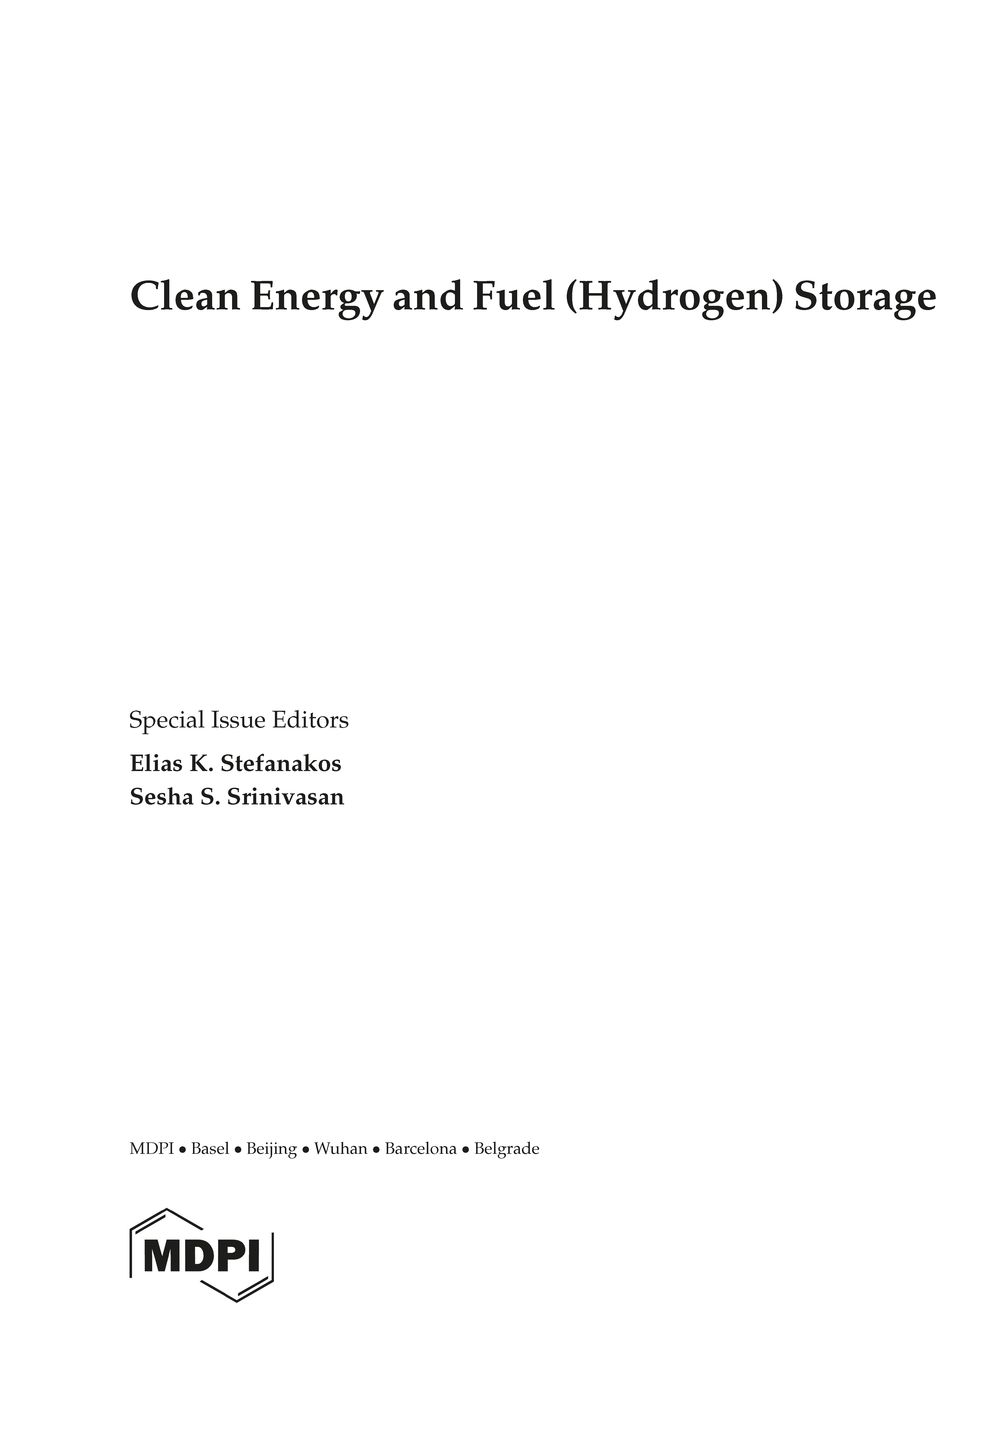 Image of the Page - (000003) - in Clean Energy and Fuel (Hydrogen) Storage